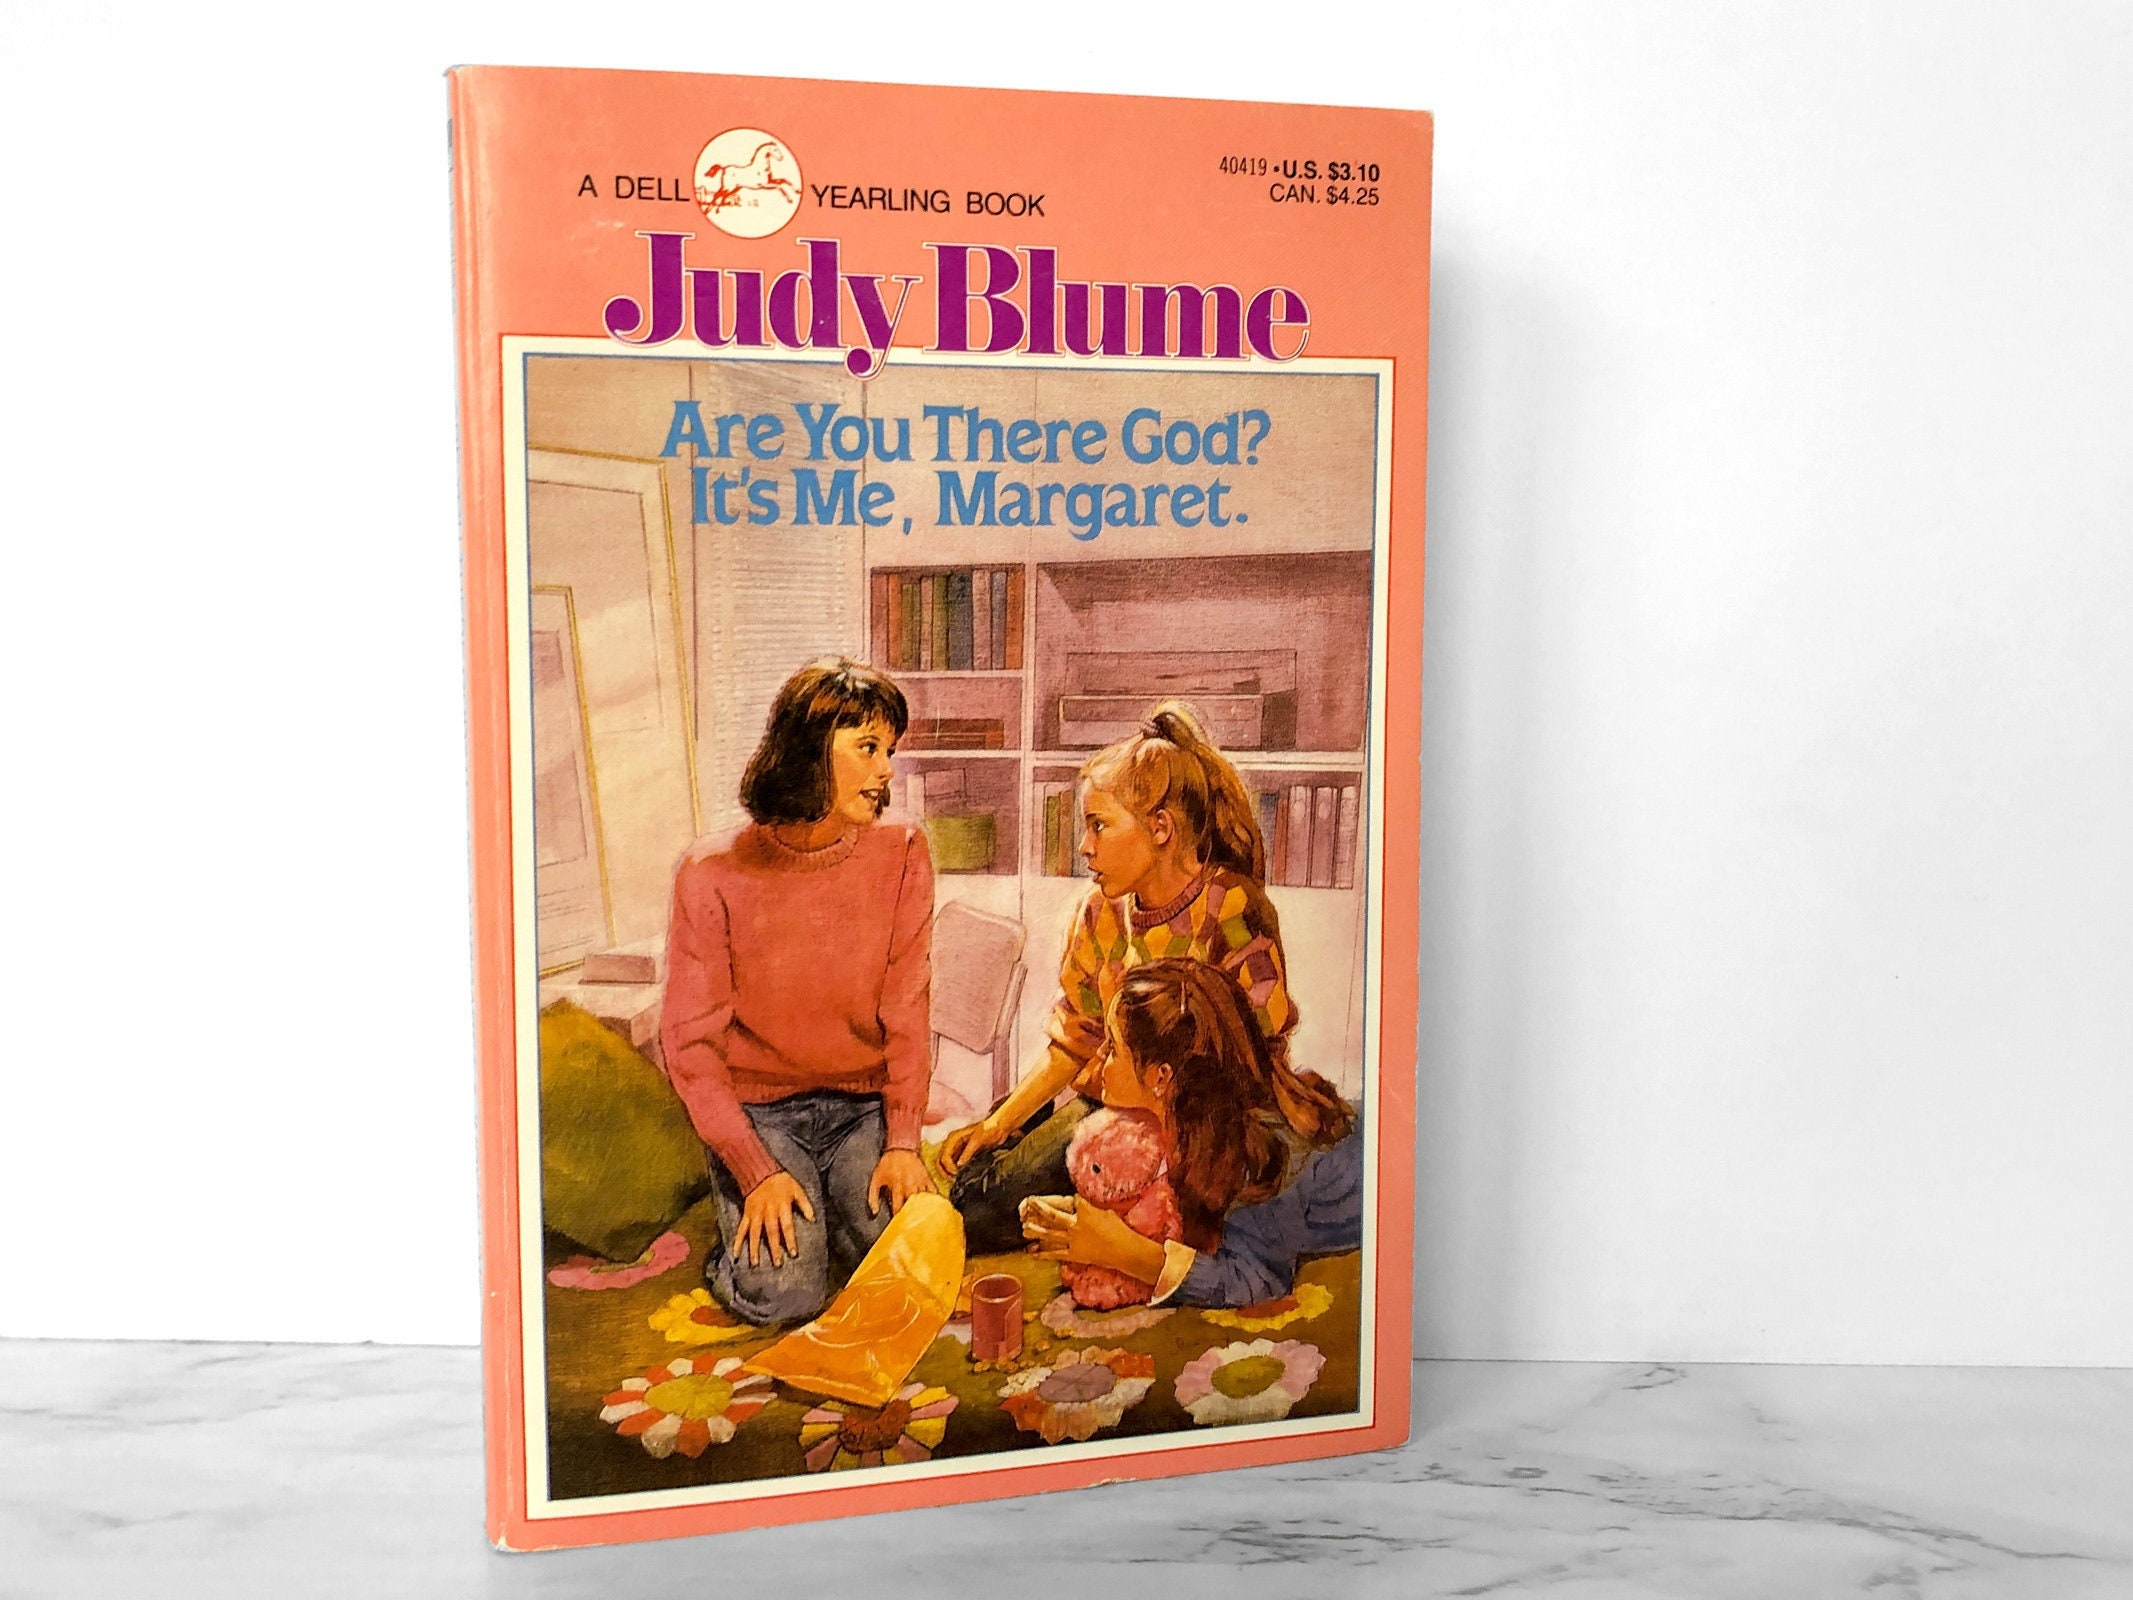 Etsy　Margaret　God　Are　Me　1986　It's　You　There　Blume　by　Judy　Ireland